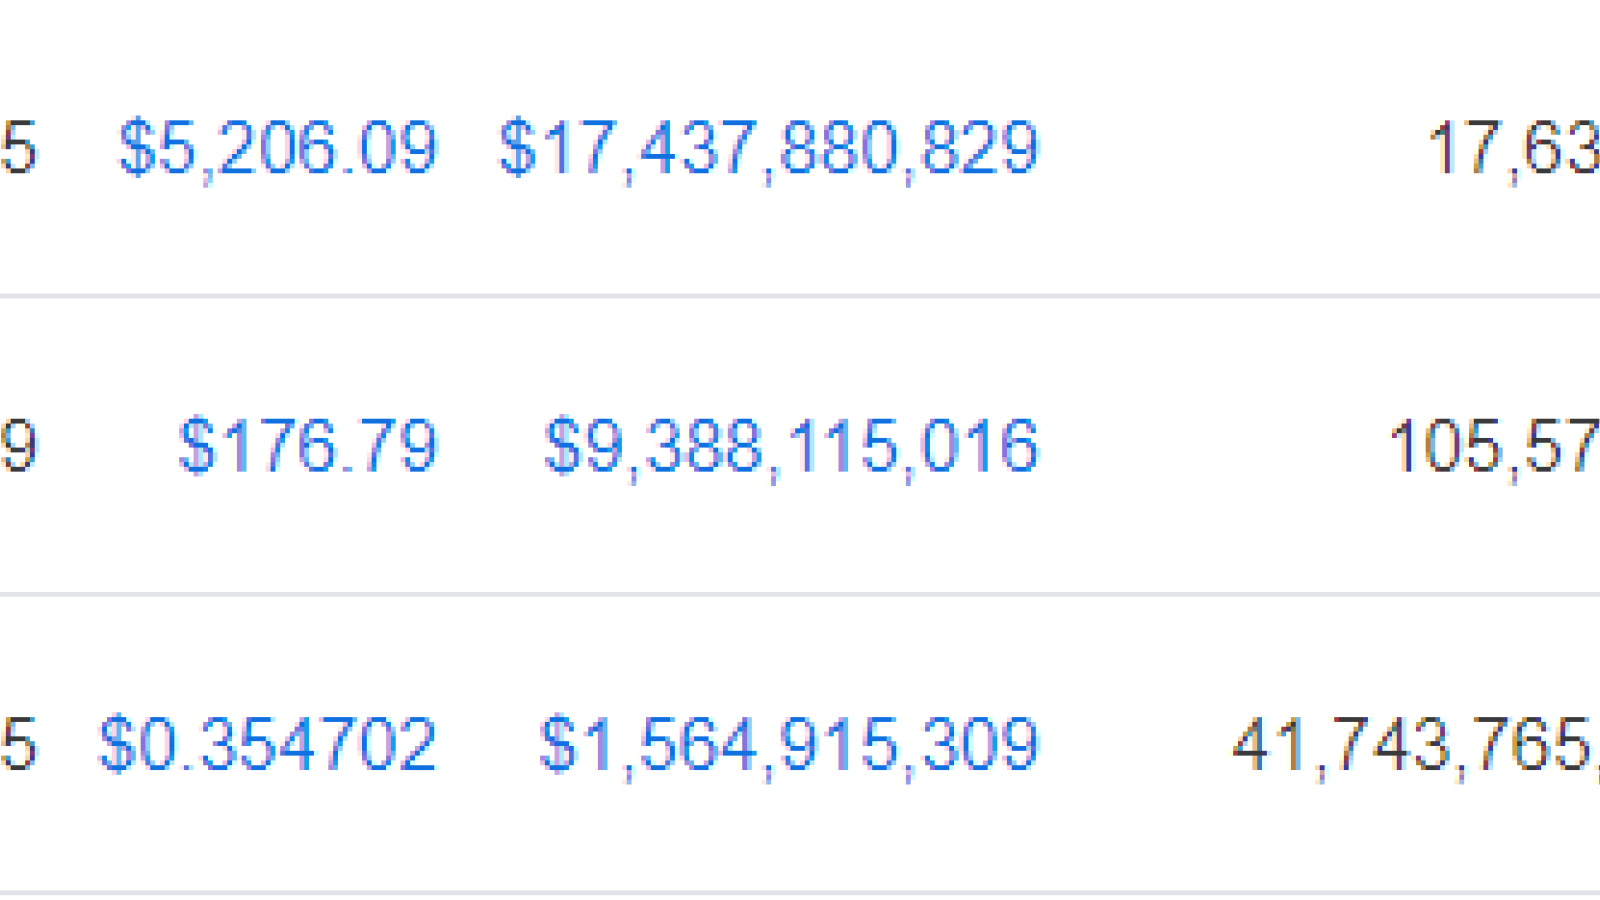 CMC: Top 3 biggest cryptocurrencies by market capitalization